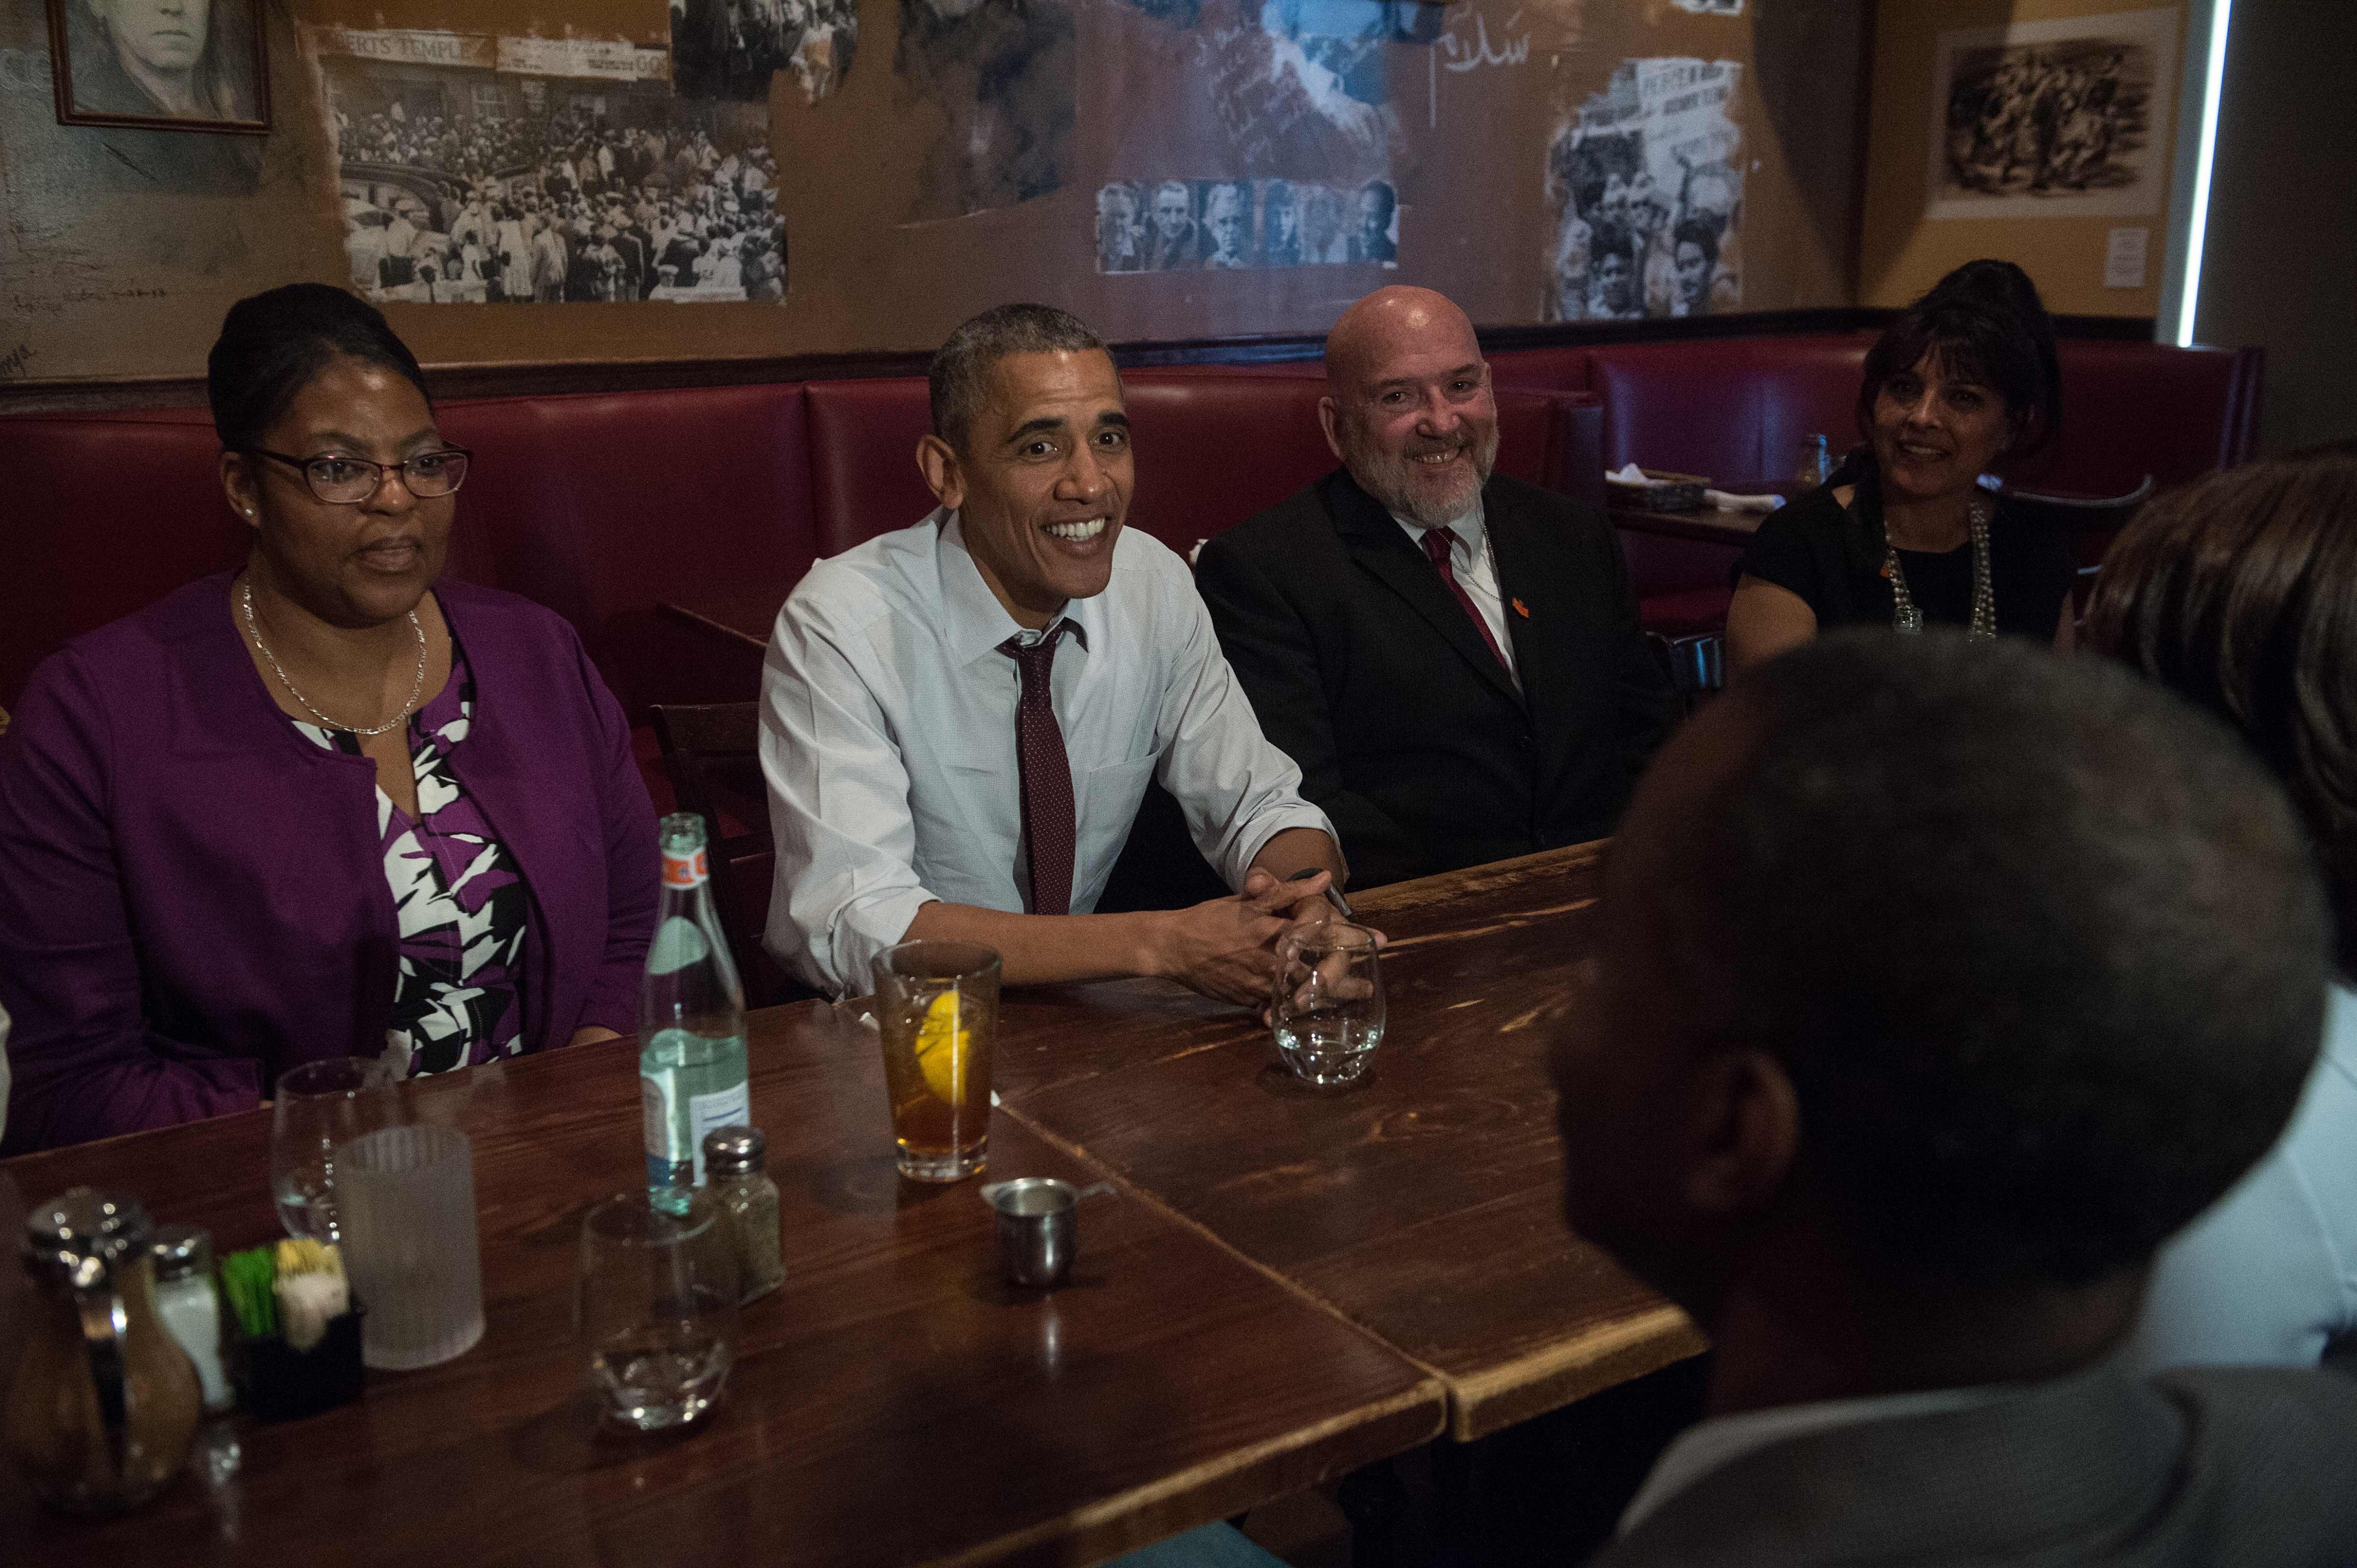 US President Barack Obama meets with formerly incarcerated individuals who have previously received commutations in Washington, DC, on March 30, 2016.NICHOLAS KAMM&mdash;AFP/Getty Images (NICHOLAS KAMM&mdash;AFP/Getty Images)